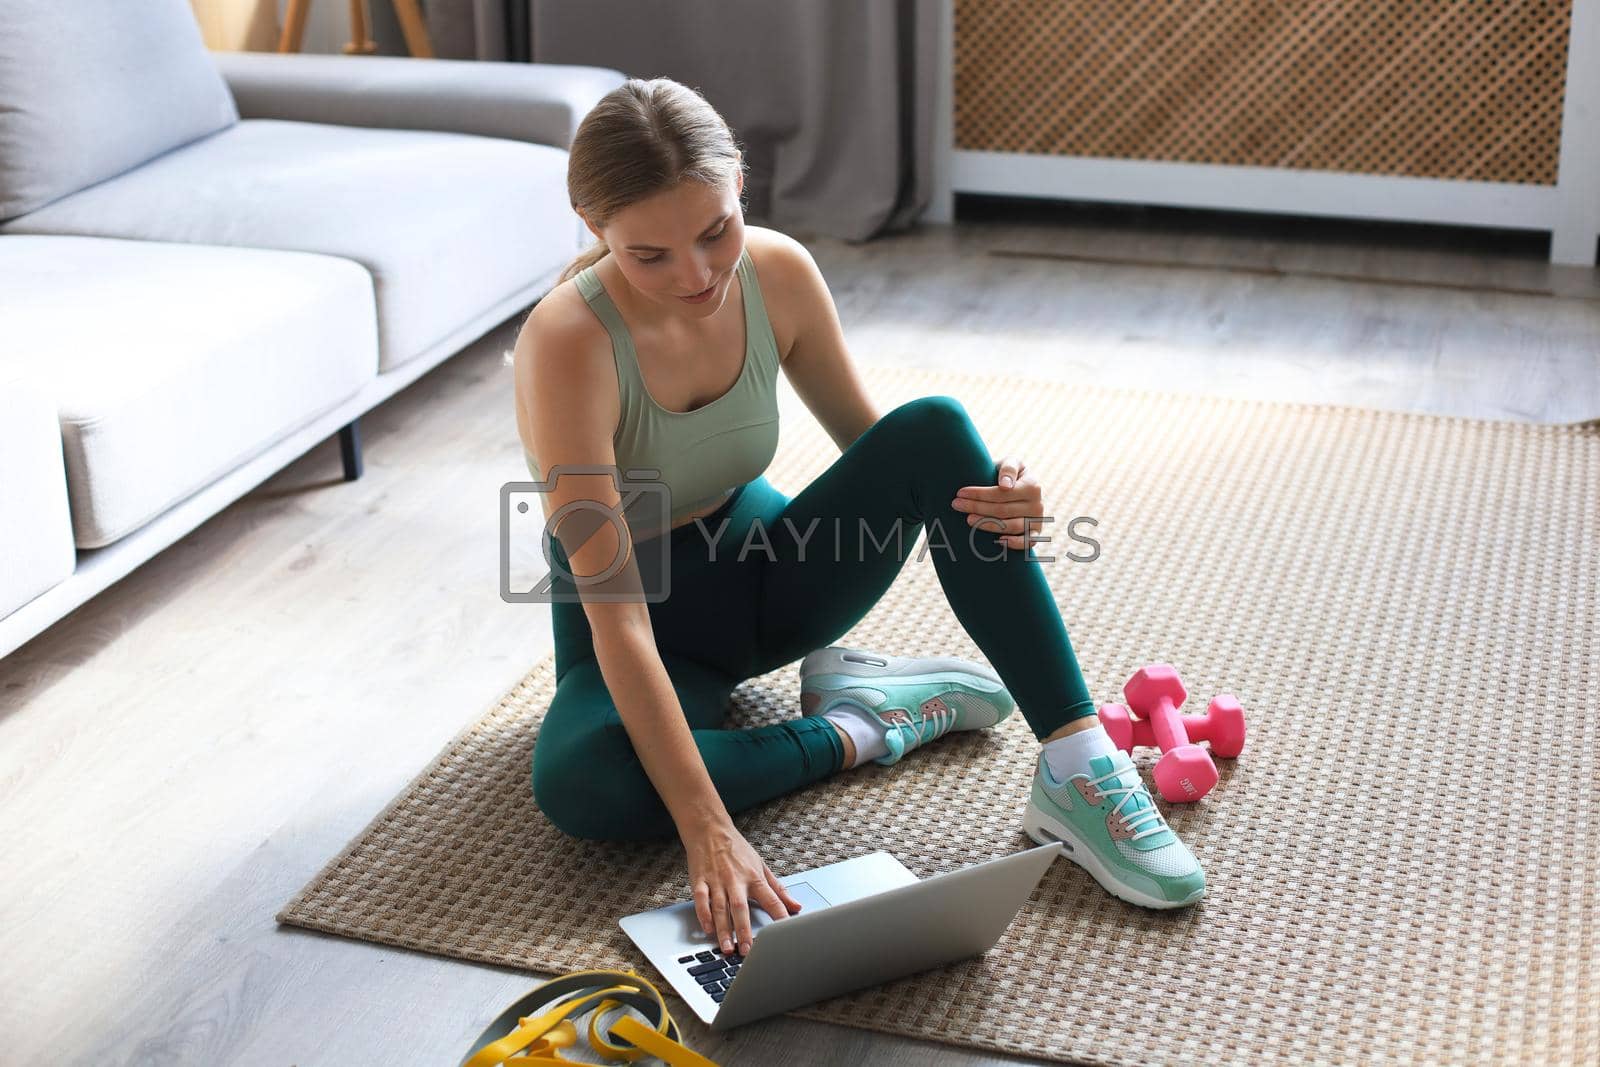 Royalty free image of Beautiful slim sporty woman in sportswear is sitting on the floor with dumbbells and is using a laptop at home in the living room. Healthy lifestyle. Stay at home activities. by tsyhun